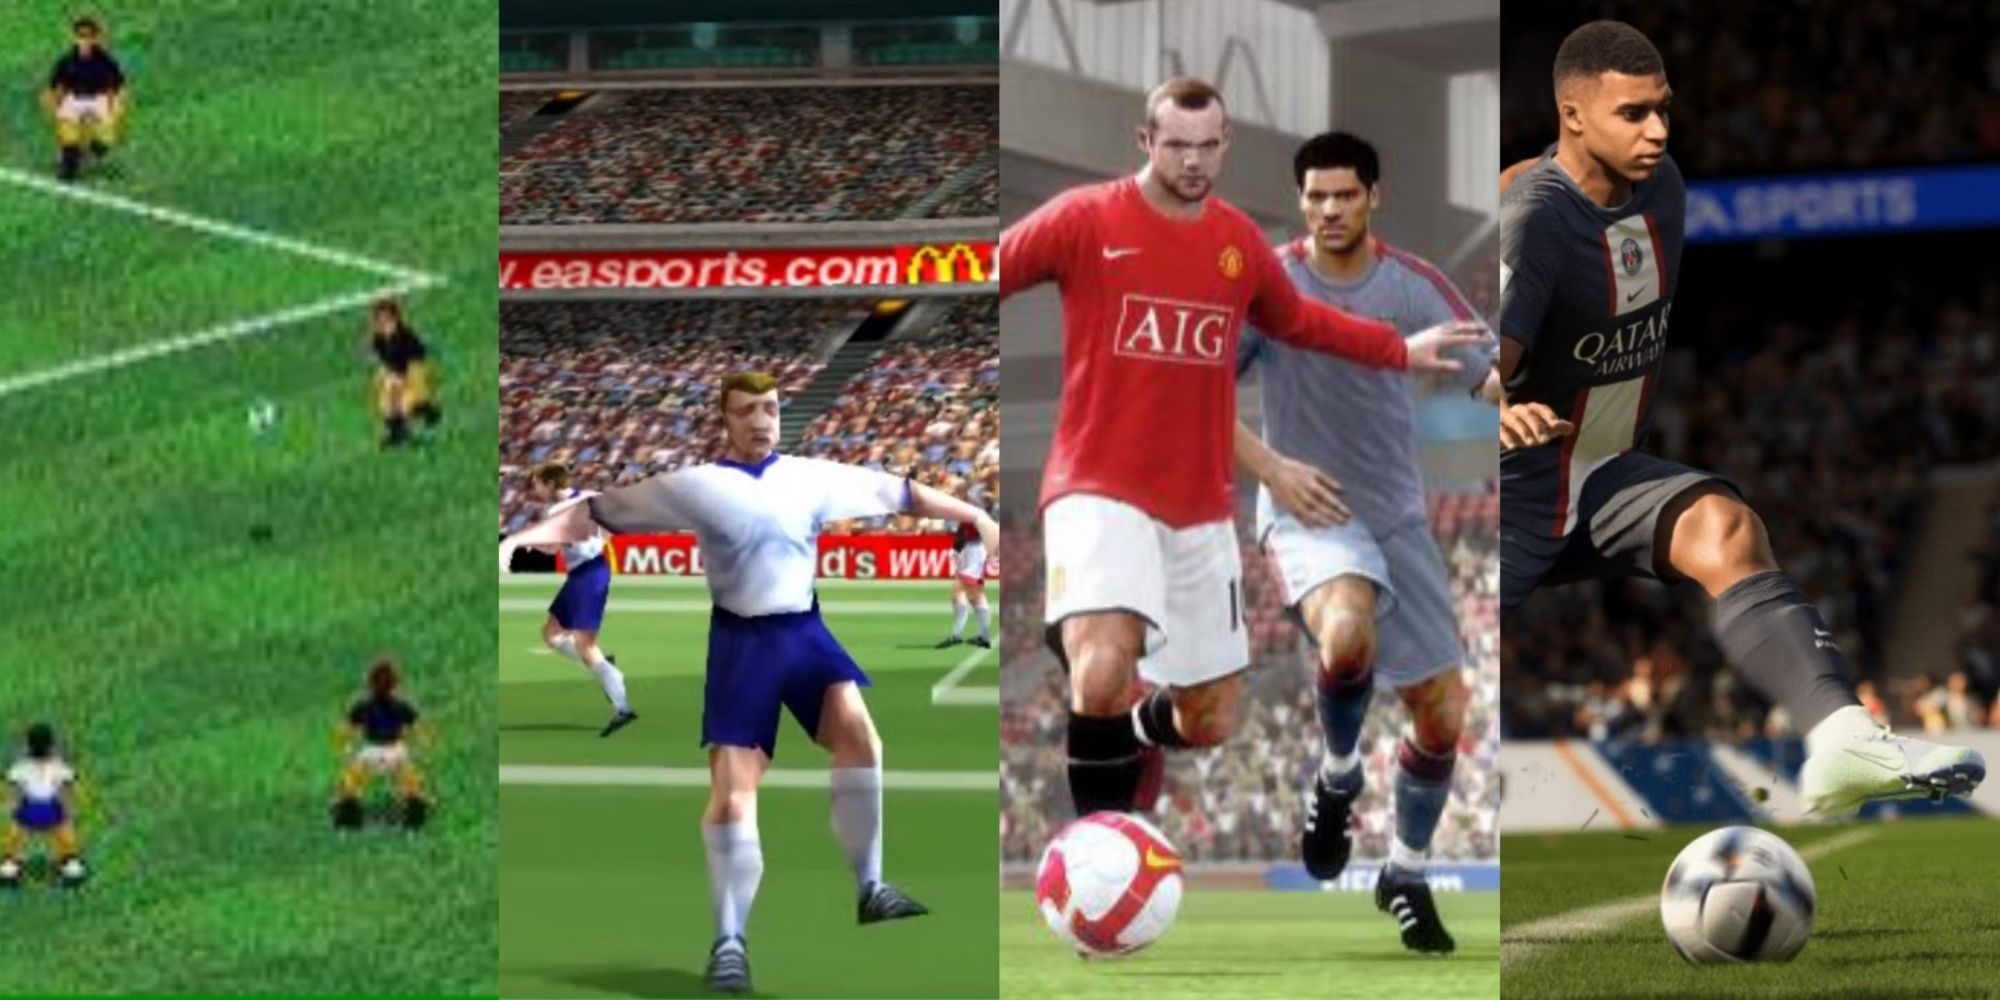 Split images of various players on football pitches in FIFA games